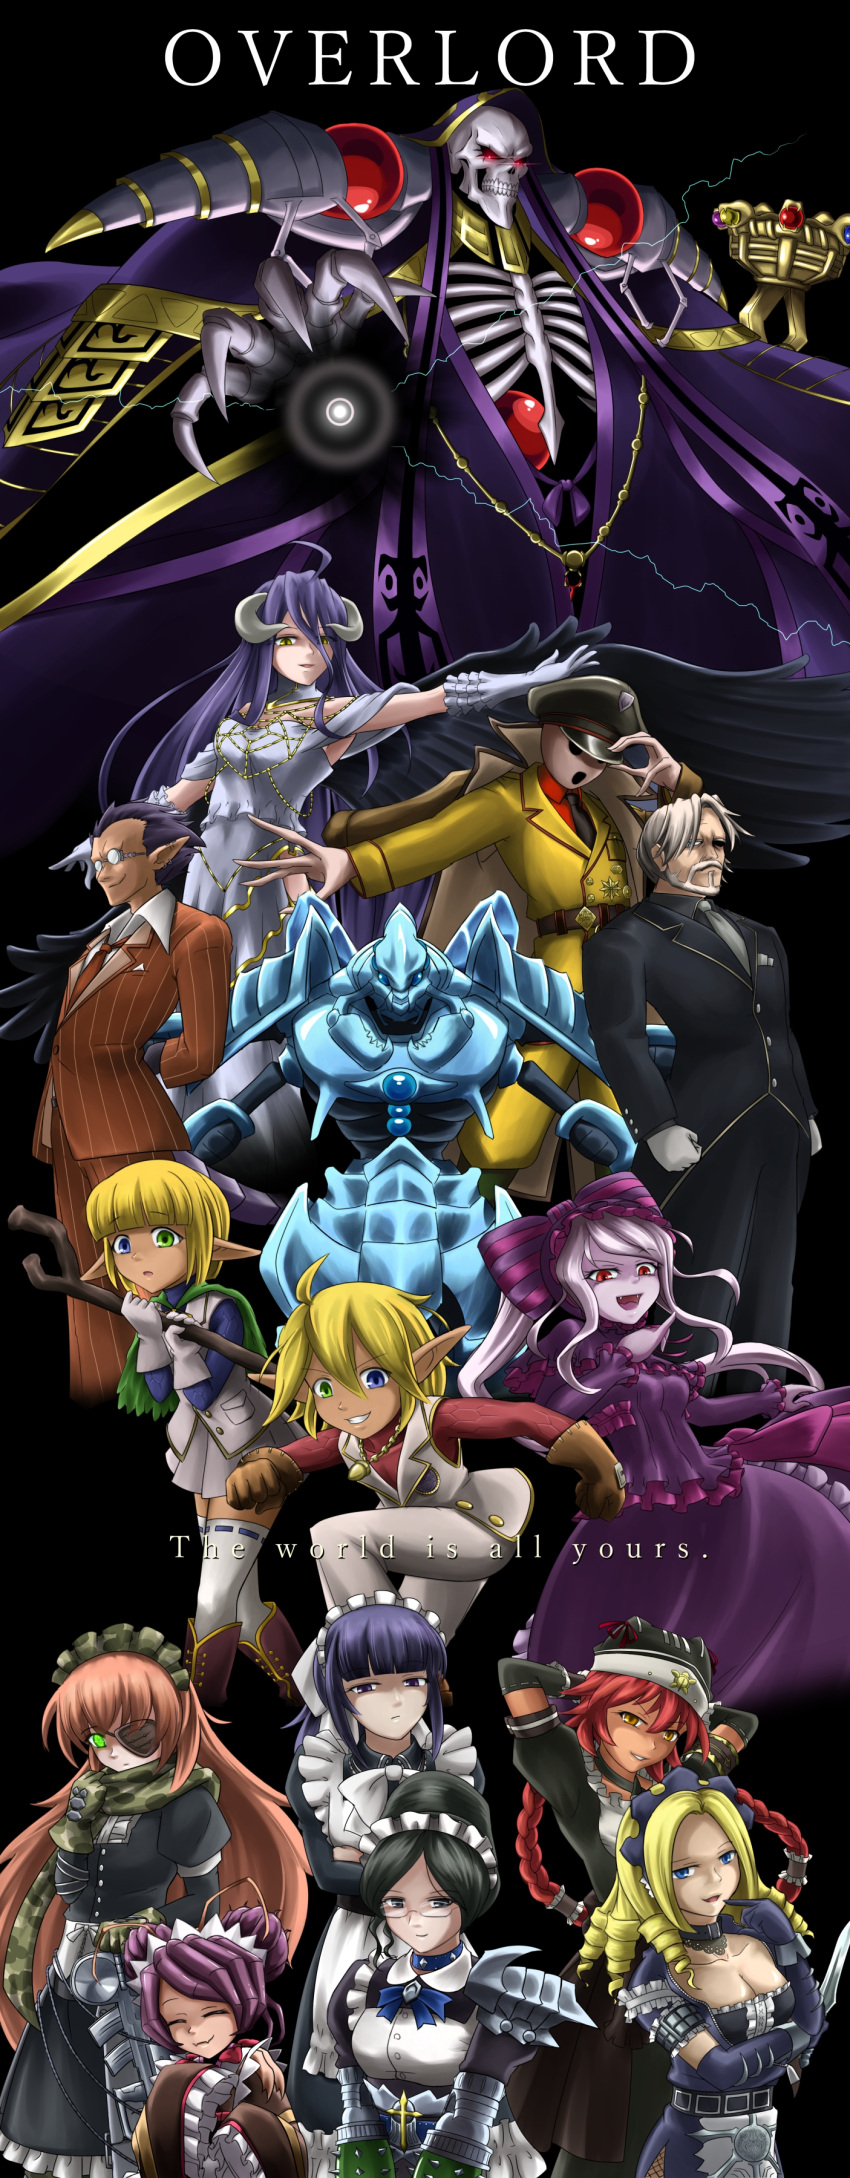 6+boys 6+girls ahoge ainz_ooal_gown albedo animal_hat antennae armor armored_dress arms_behind_head artist_request aura_bella_fiora beard black_eyes black_hair blonde_hair blue_eyes boots braid brother_and_sister butler cleavage closed_eyes coat cocytus_(overlord) collar crossed_arms cz2128_delta dark_elf dark_skin demiurge detached_sleeves doppelganger double_bun dress drill_hair ear_piercing english entoma_vasilissa_zeta extra_arms extra_eyes eyepatch fang formal frills glasses gloves gothic_lolita green_eyes gun hair_bun hat hat_ribbon heterochromia hood horns insect insect_girl kimono kunai lightning long_hair long_sleeves lupusregina_beta maid maid_apron maid_headdress mare_bello_fiore multiple_boys multiple_girls narberal_gamma nazi necktie overlord_(maruyama) pandora's_actor pink_hair pinstripe_suit pointy_ears ponytail purple_hair red_eyes redhead ribbon robe scarf sebas_tian shalltear_bloodfallen short_hair shoulder_armor siblings skeleton skirt sleeves_past_wrists smile solution_epsilon staff striped suit thigh-highs twin_braids vampire weapon white_hair wings yellow_eyes yuri_alpha